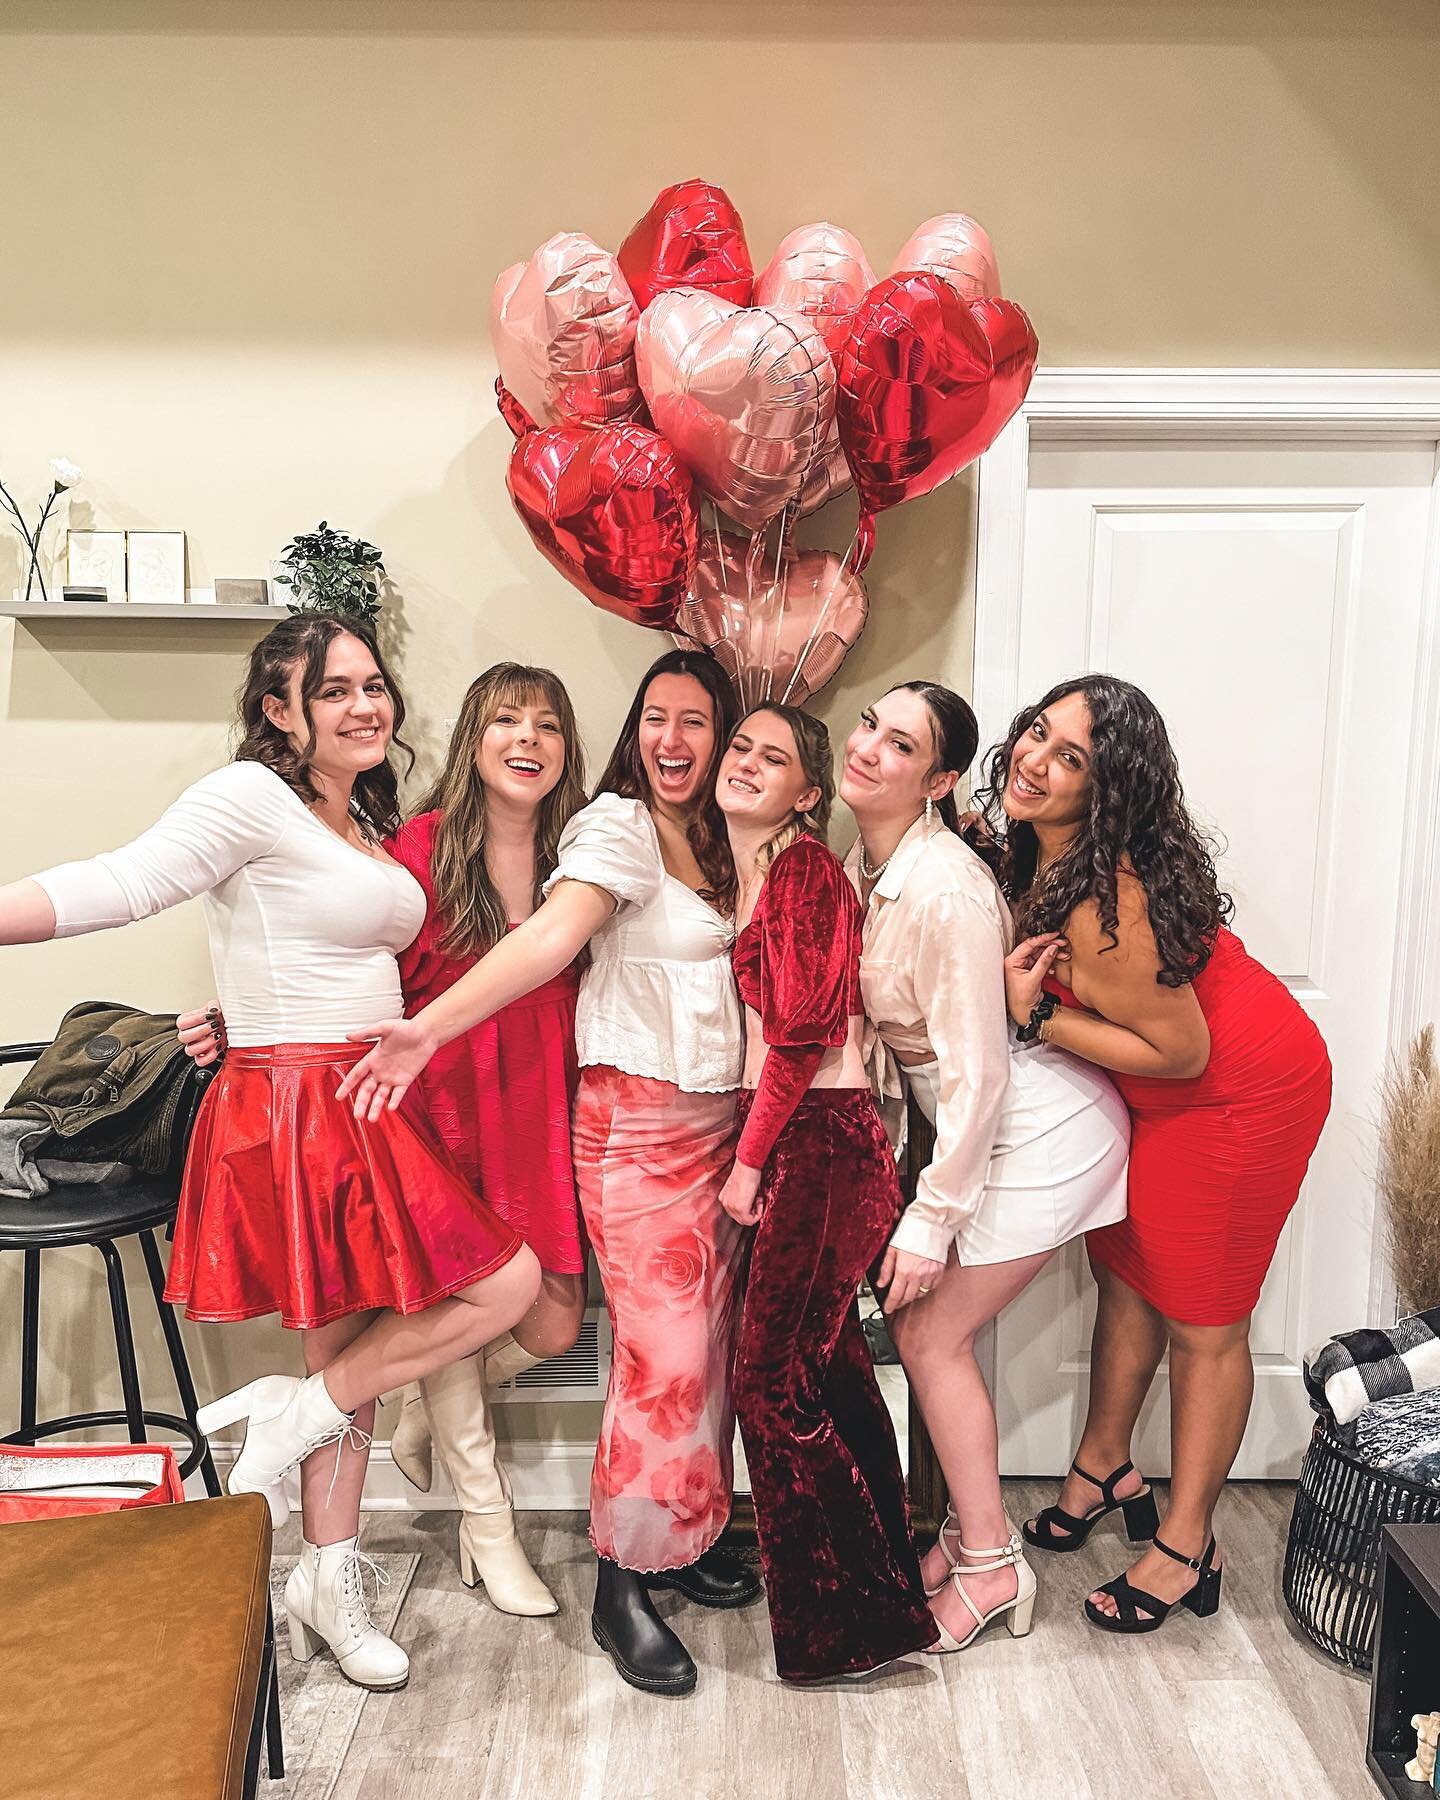 dream team 🫶🏽💘 

feeling beyond blessed to celebrate all the incredible women in my life 🥰

#februarymoments #aboutlastnight #galentines #selflove #❤️